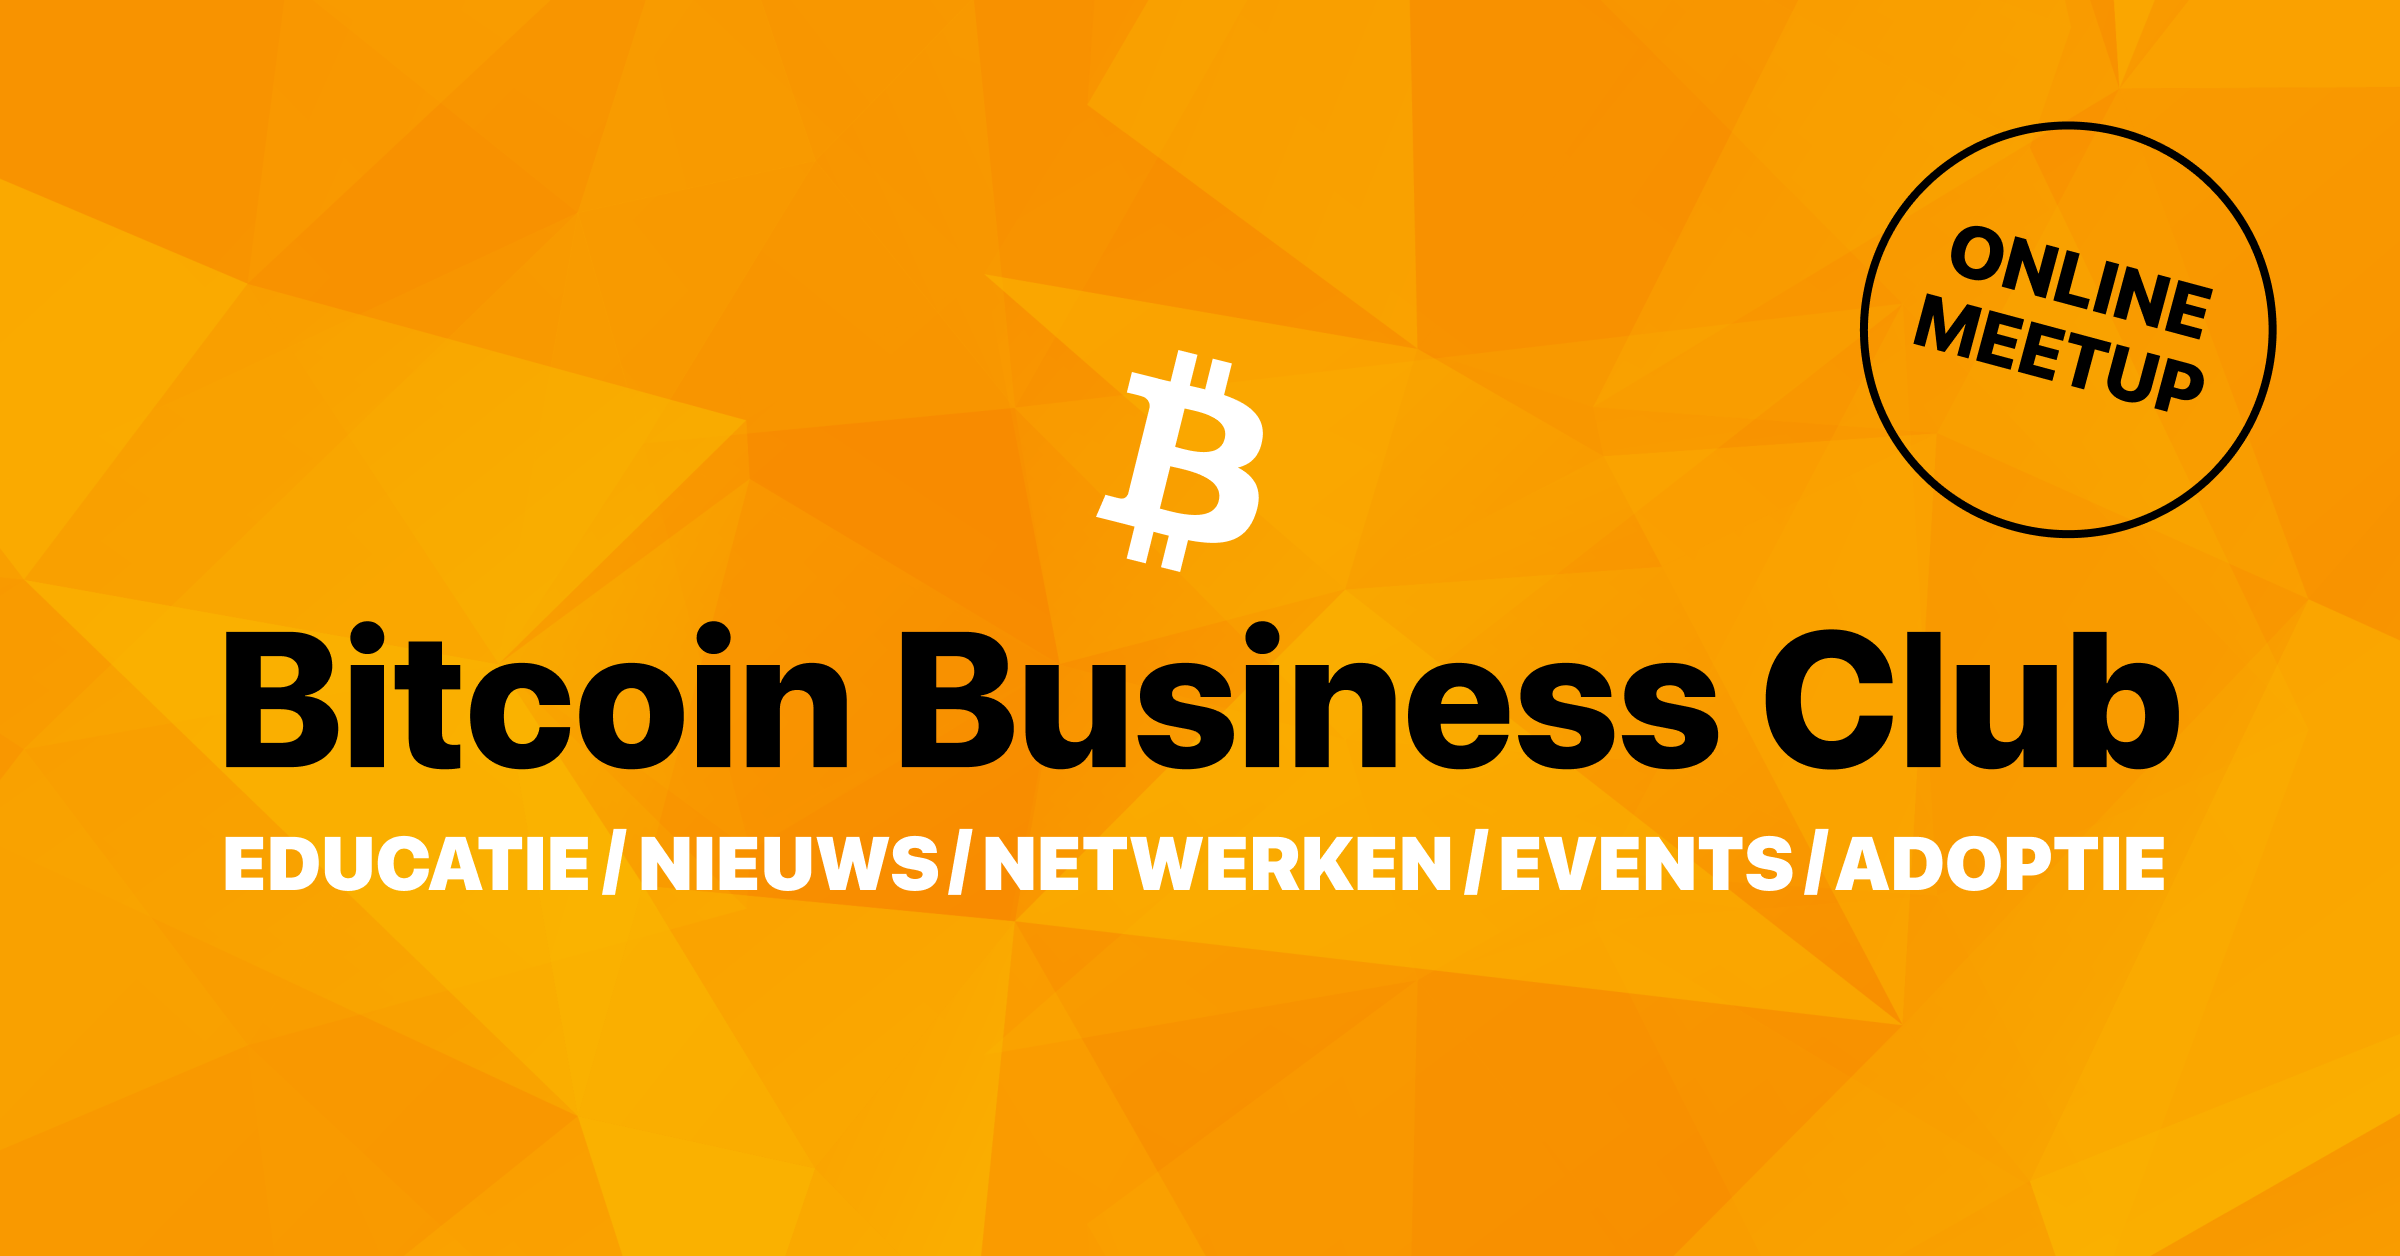 Featured-image-Bitcoin-Business-Club-Meetup-v2